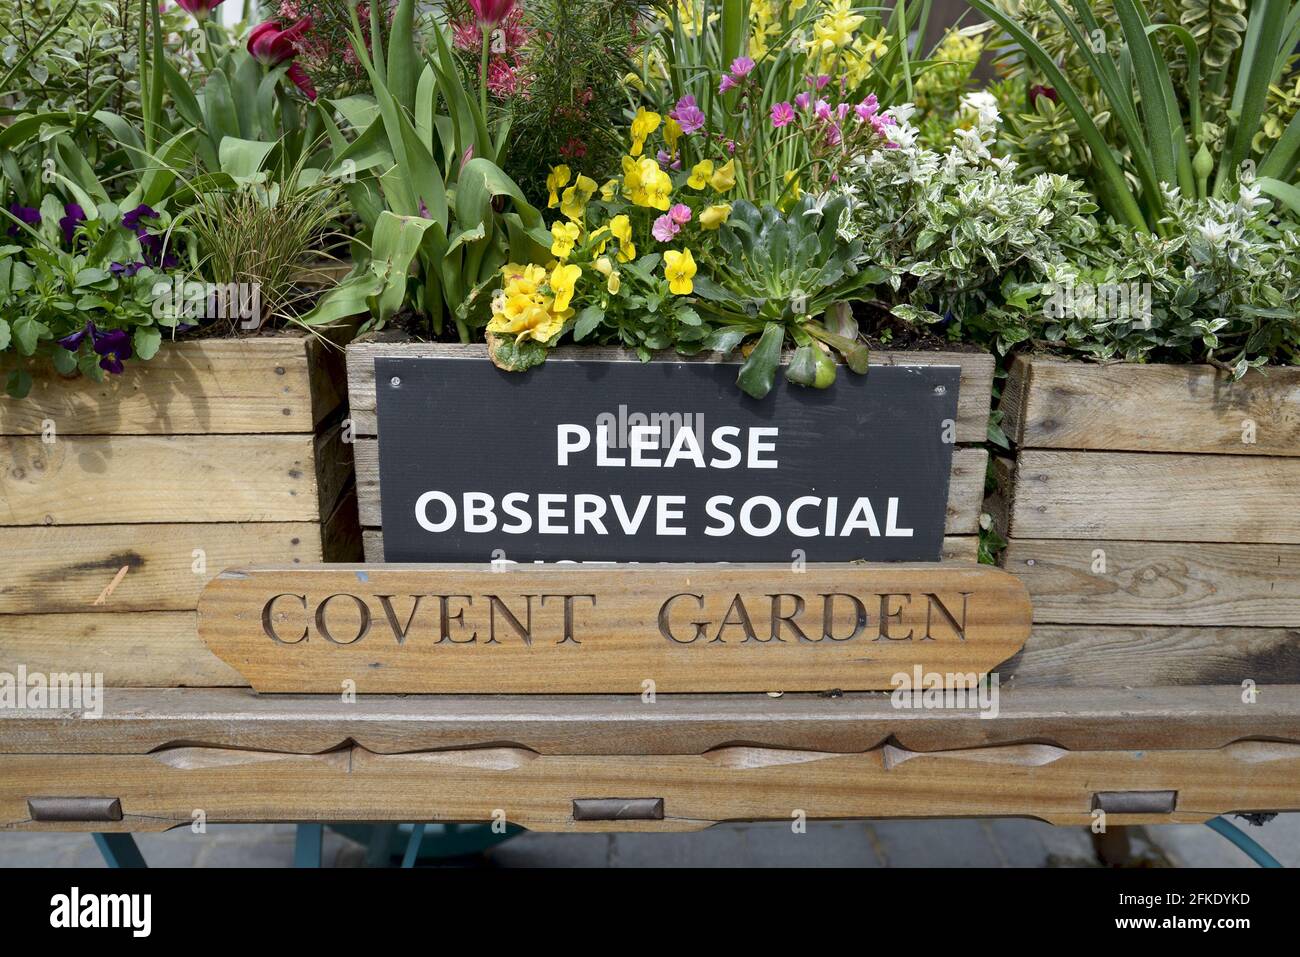 London, England, UK. Covent Garden 'Please Observe Social (Distancing)' sign welcoming shoppers back after the COVID lockdown, April 2021 Stock Photo